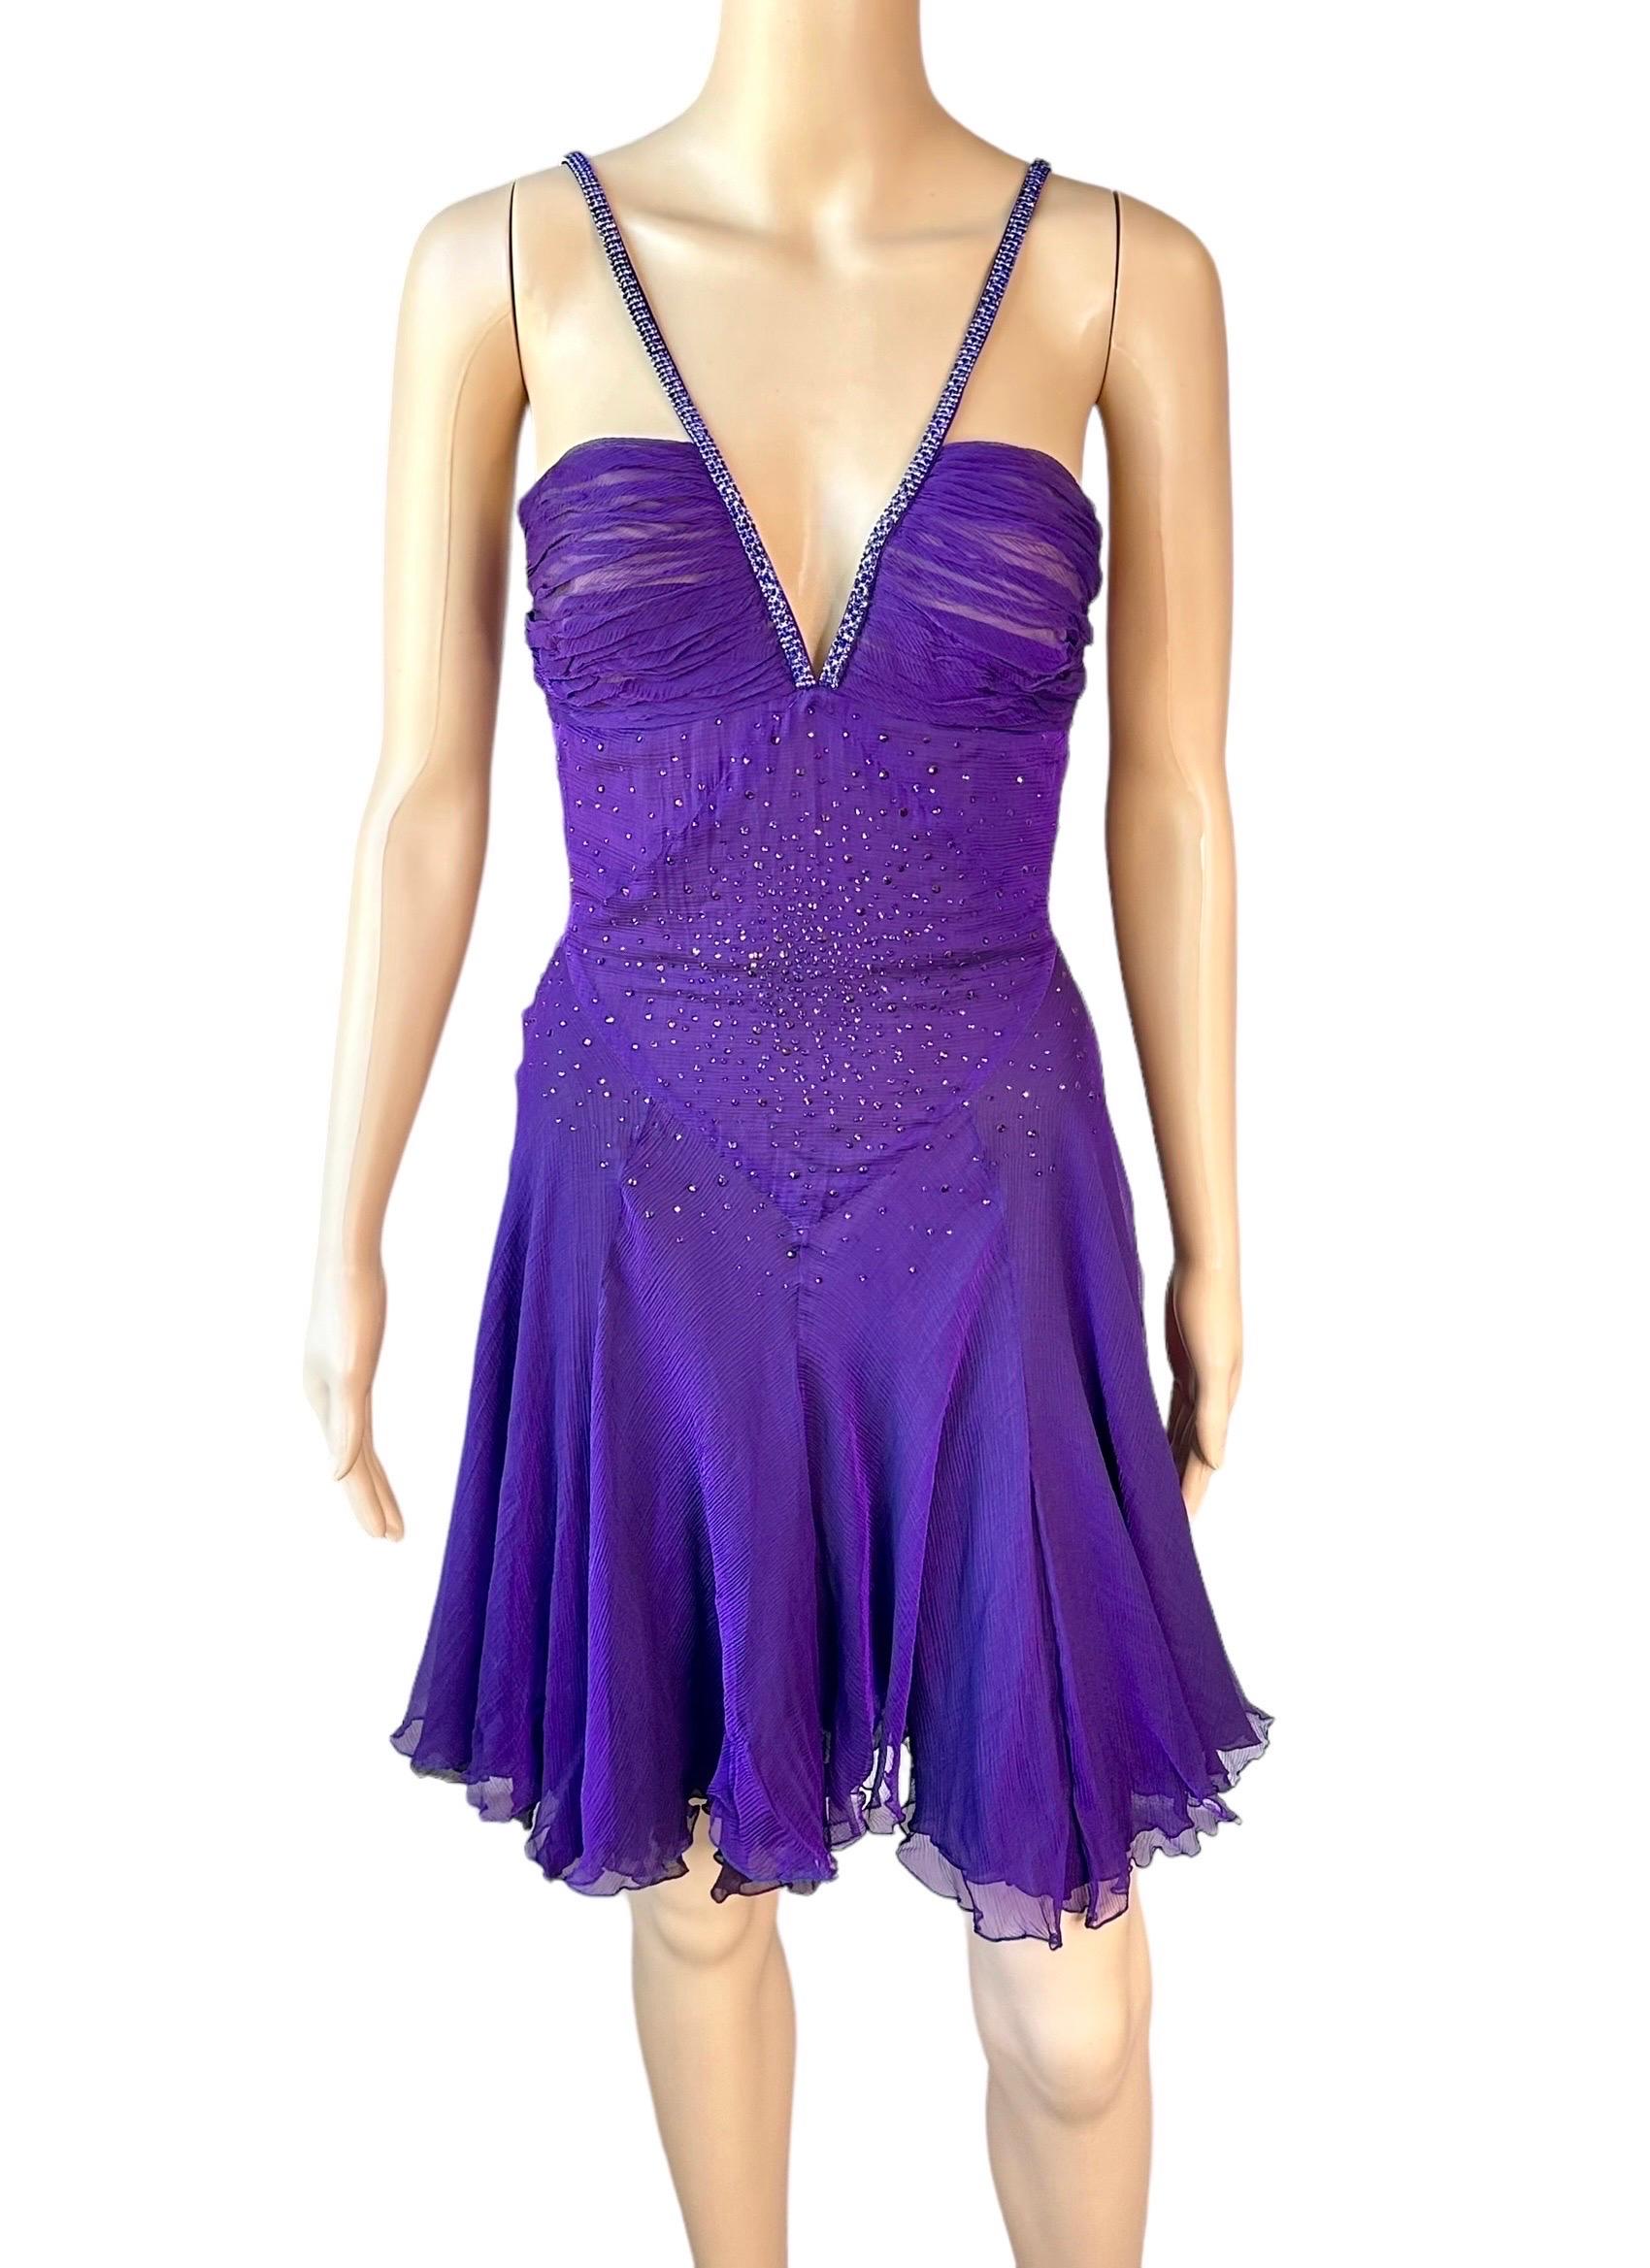 Versace c.2007 Crystal Embellished Plunging Neckline Semi-Sheer Purple Dress IT 42

Versace purple semi sheer dress featuring a plunging neckline, semi-exposed back, flared design, crystal embellished straps and rhinestones throughout the